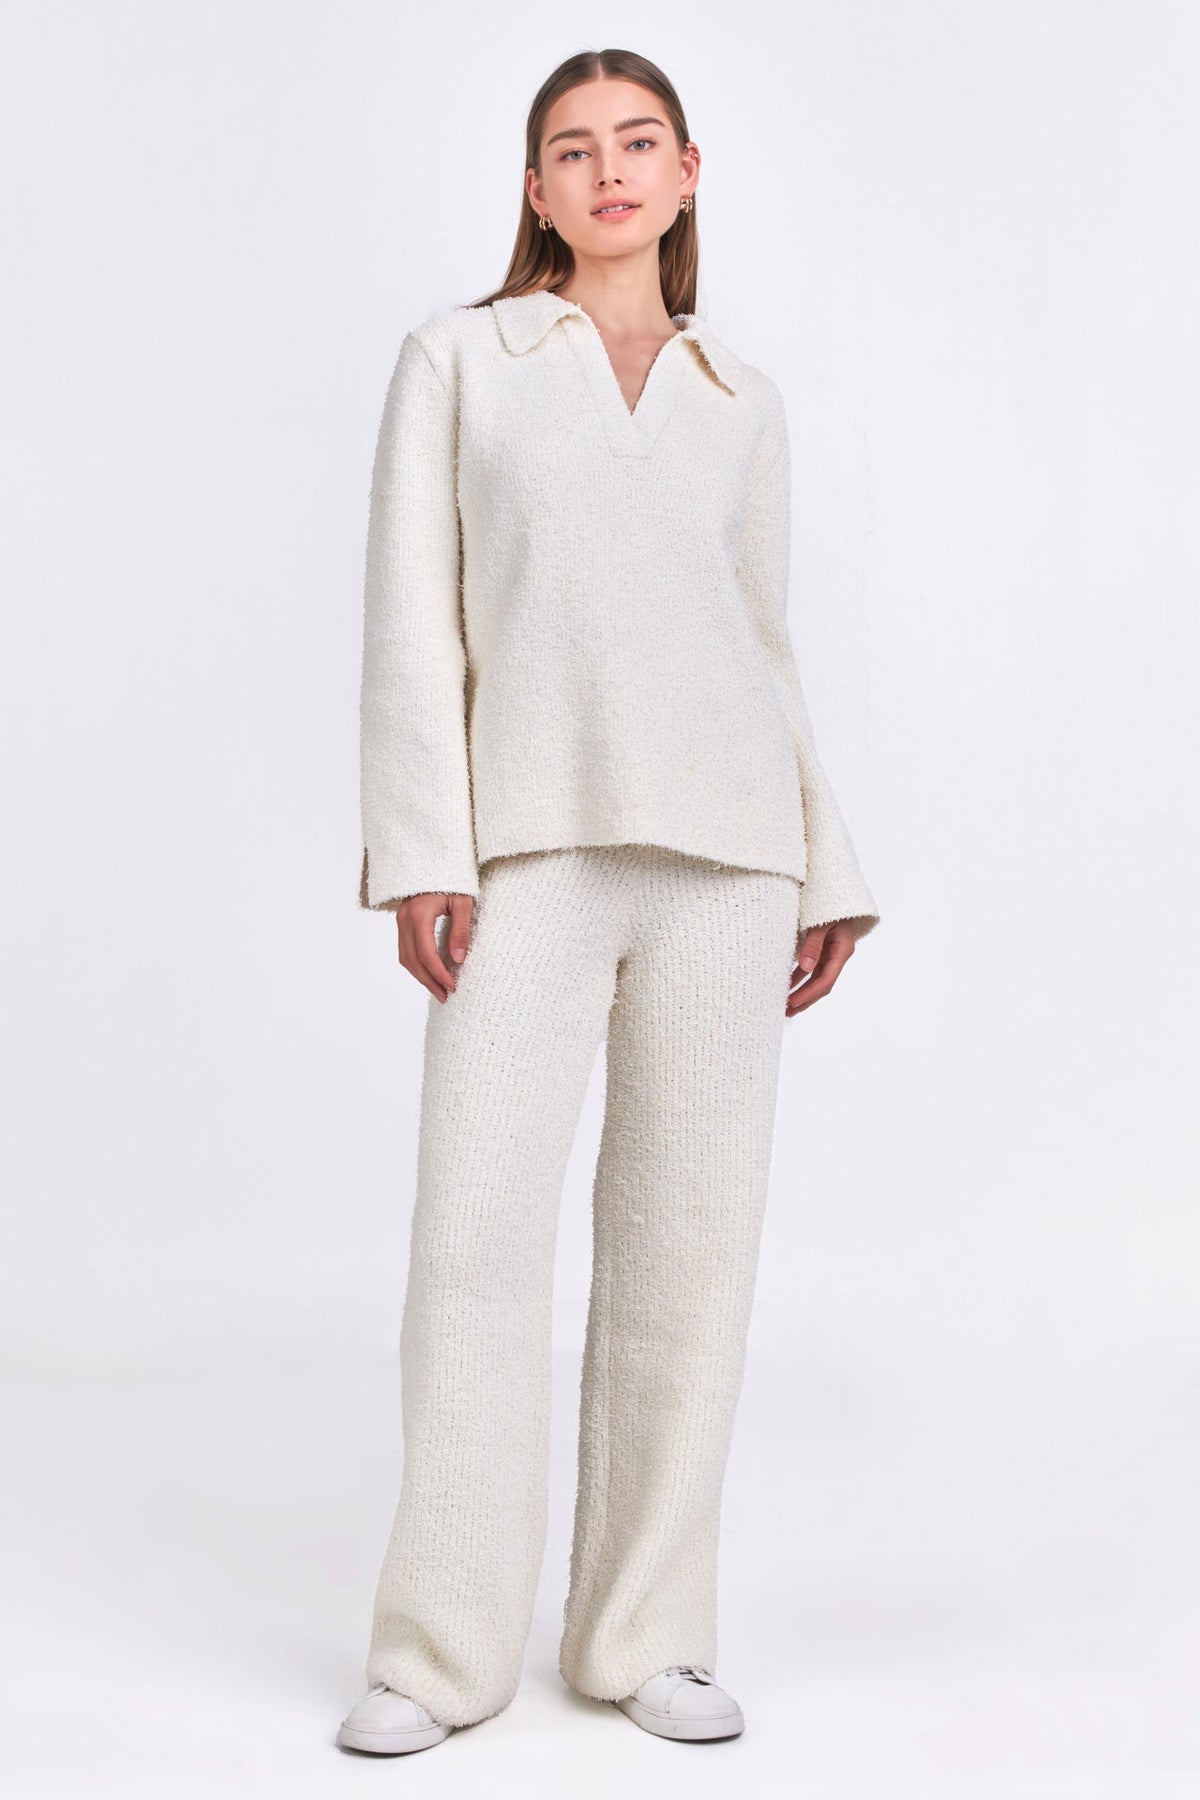 ENDLESS ROSE - Textured Fuzzy Knit Pants - PANTS available at Objectrare